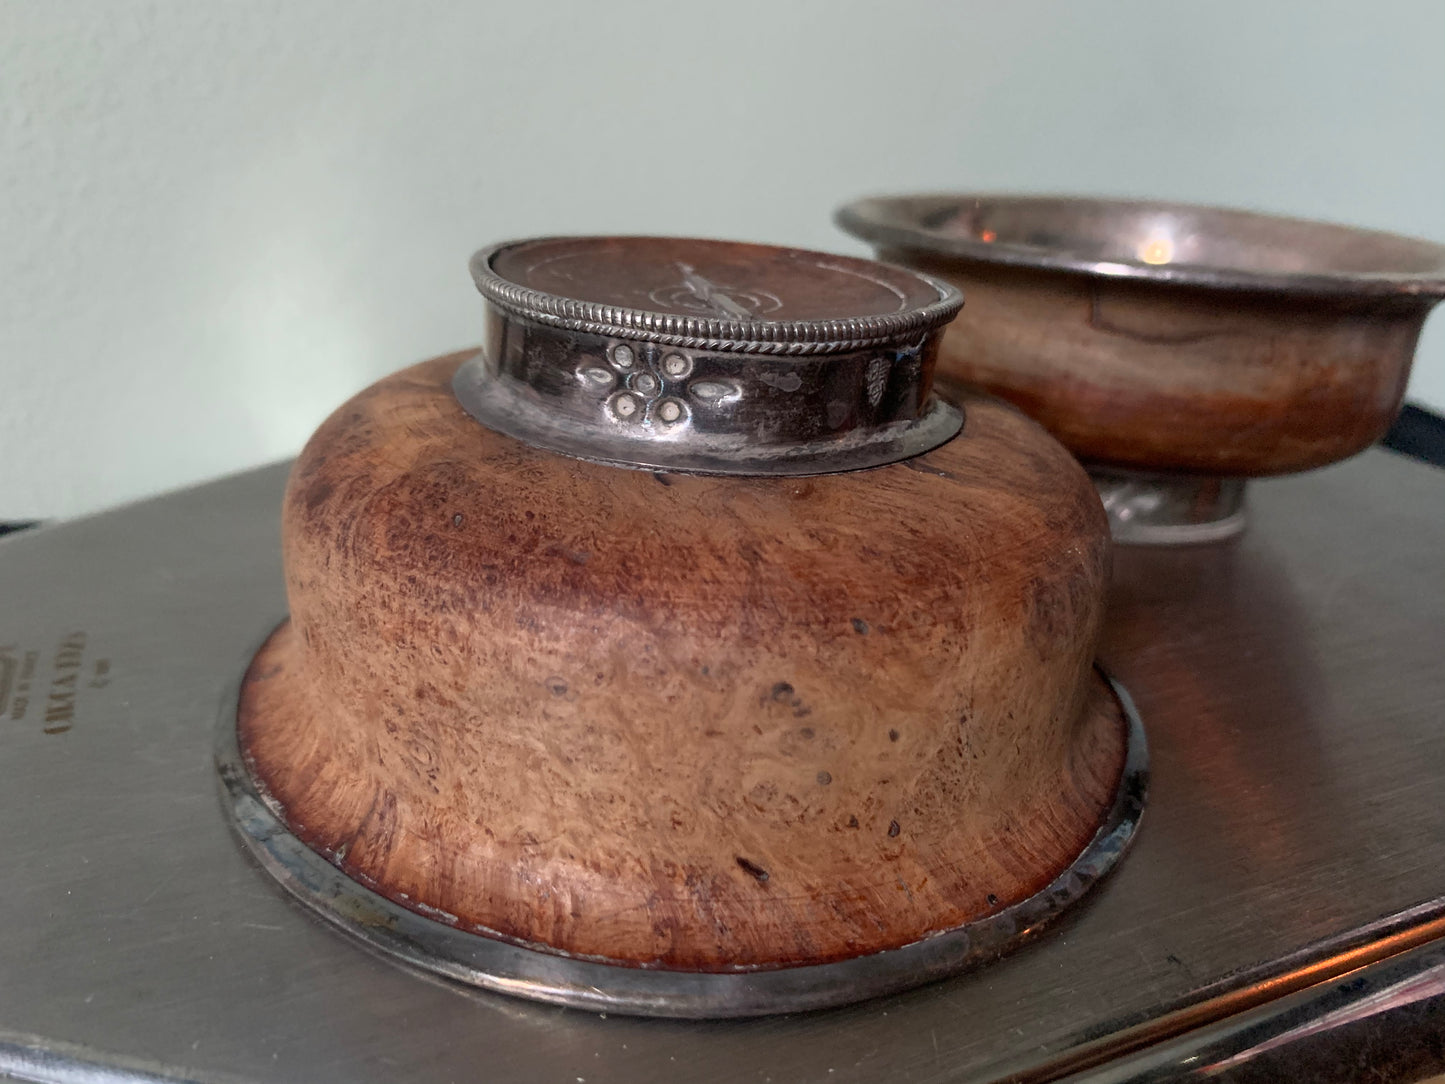 Wooden Tibetan bowls with silver details